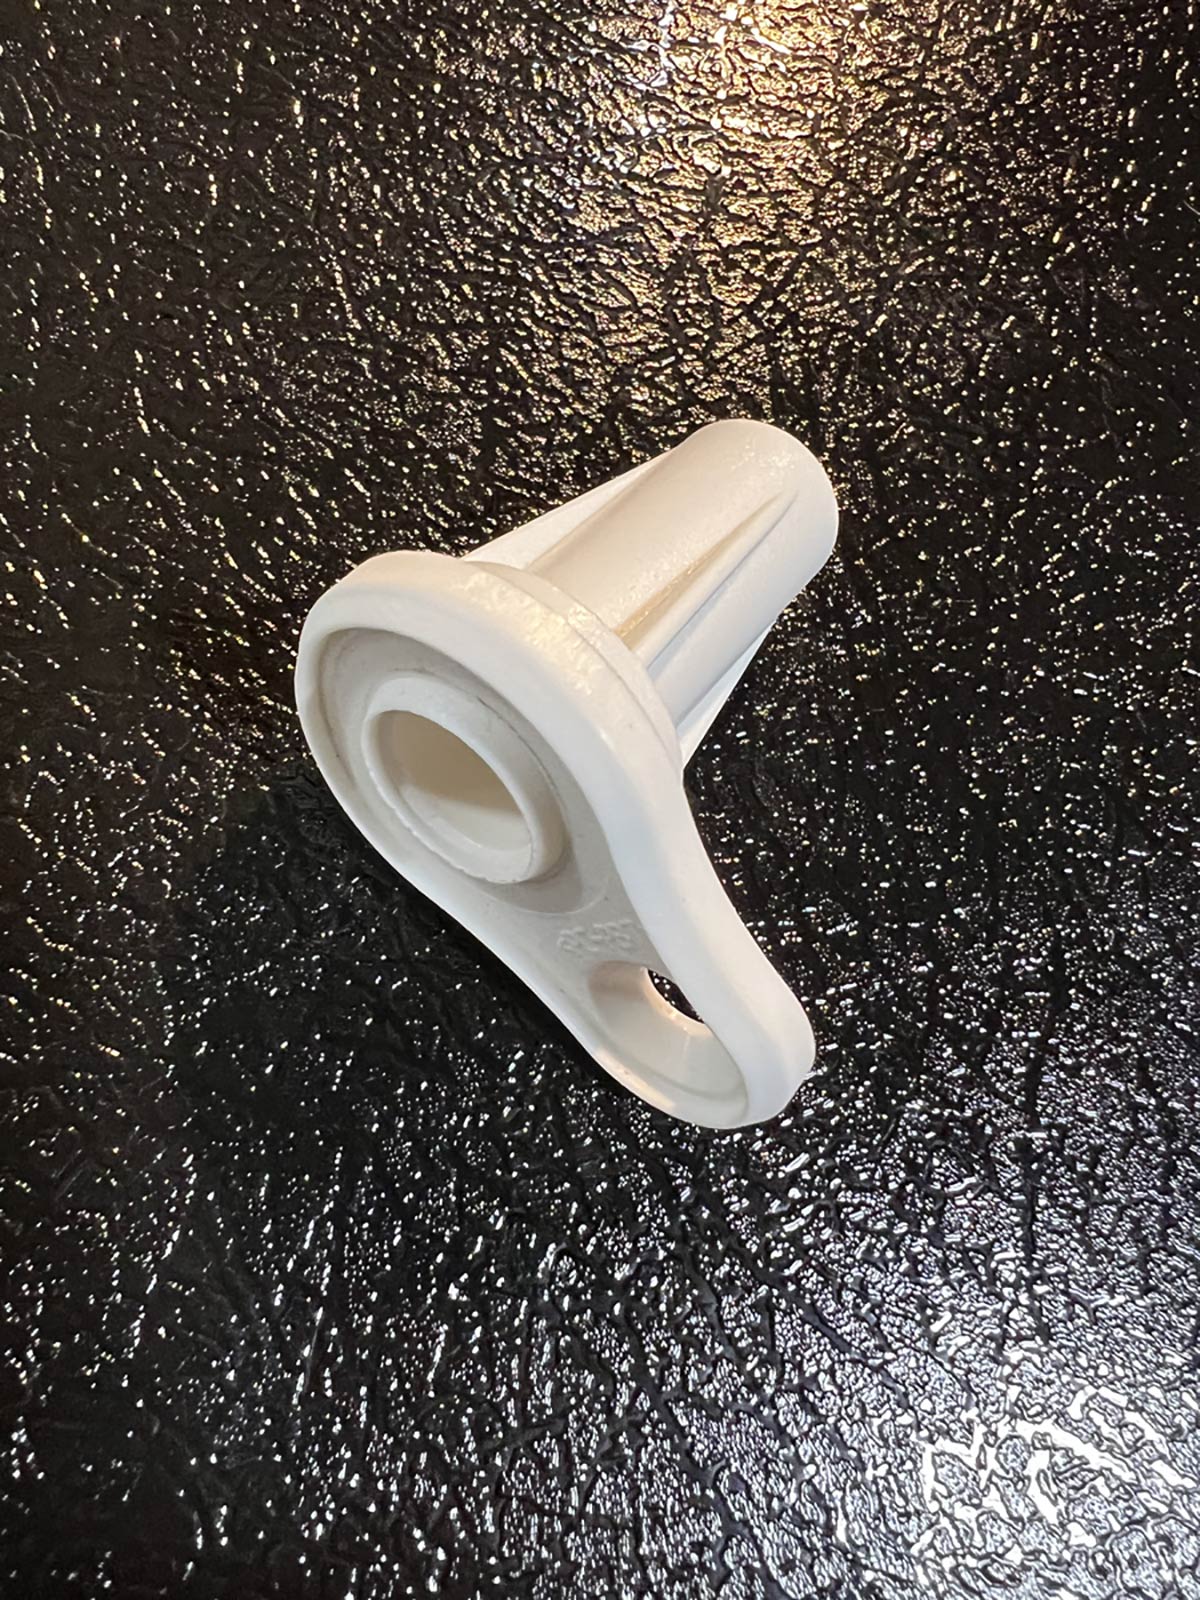 white injection molded sensor holder with structural ribs